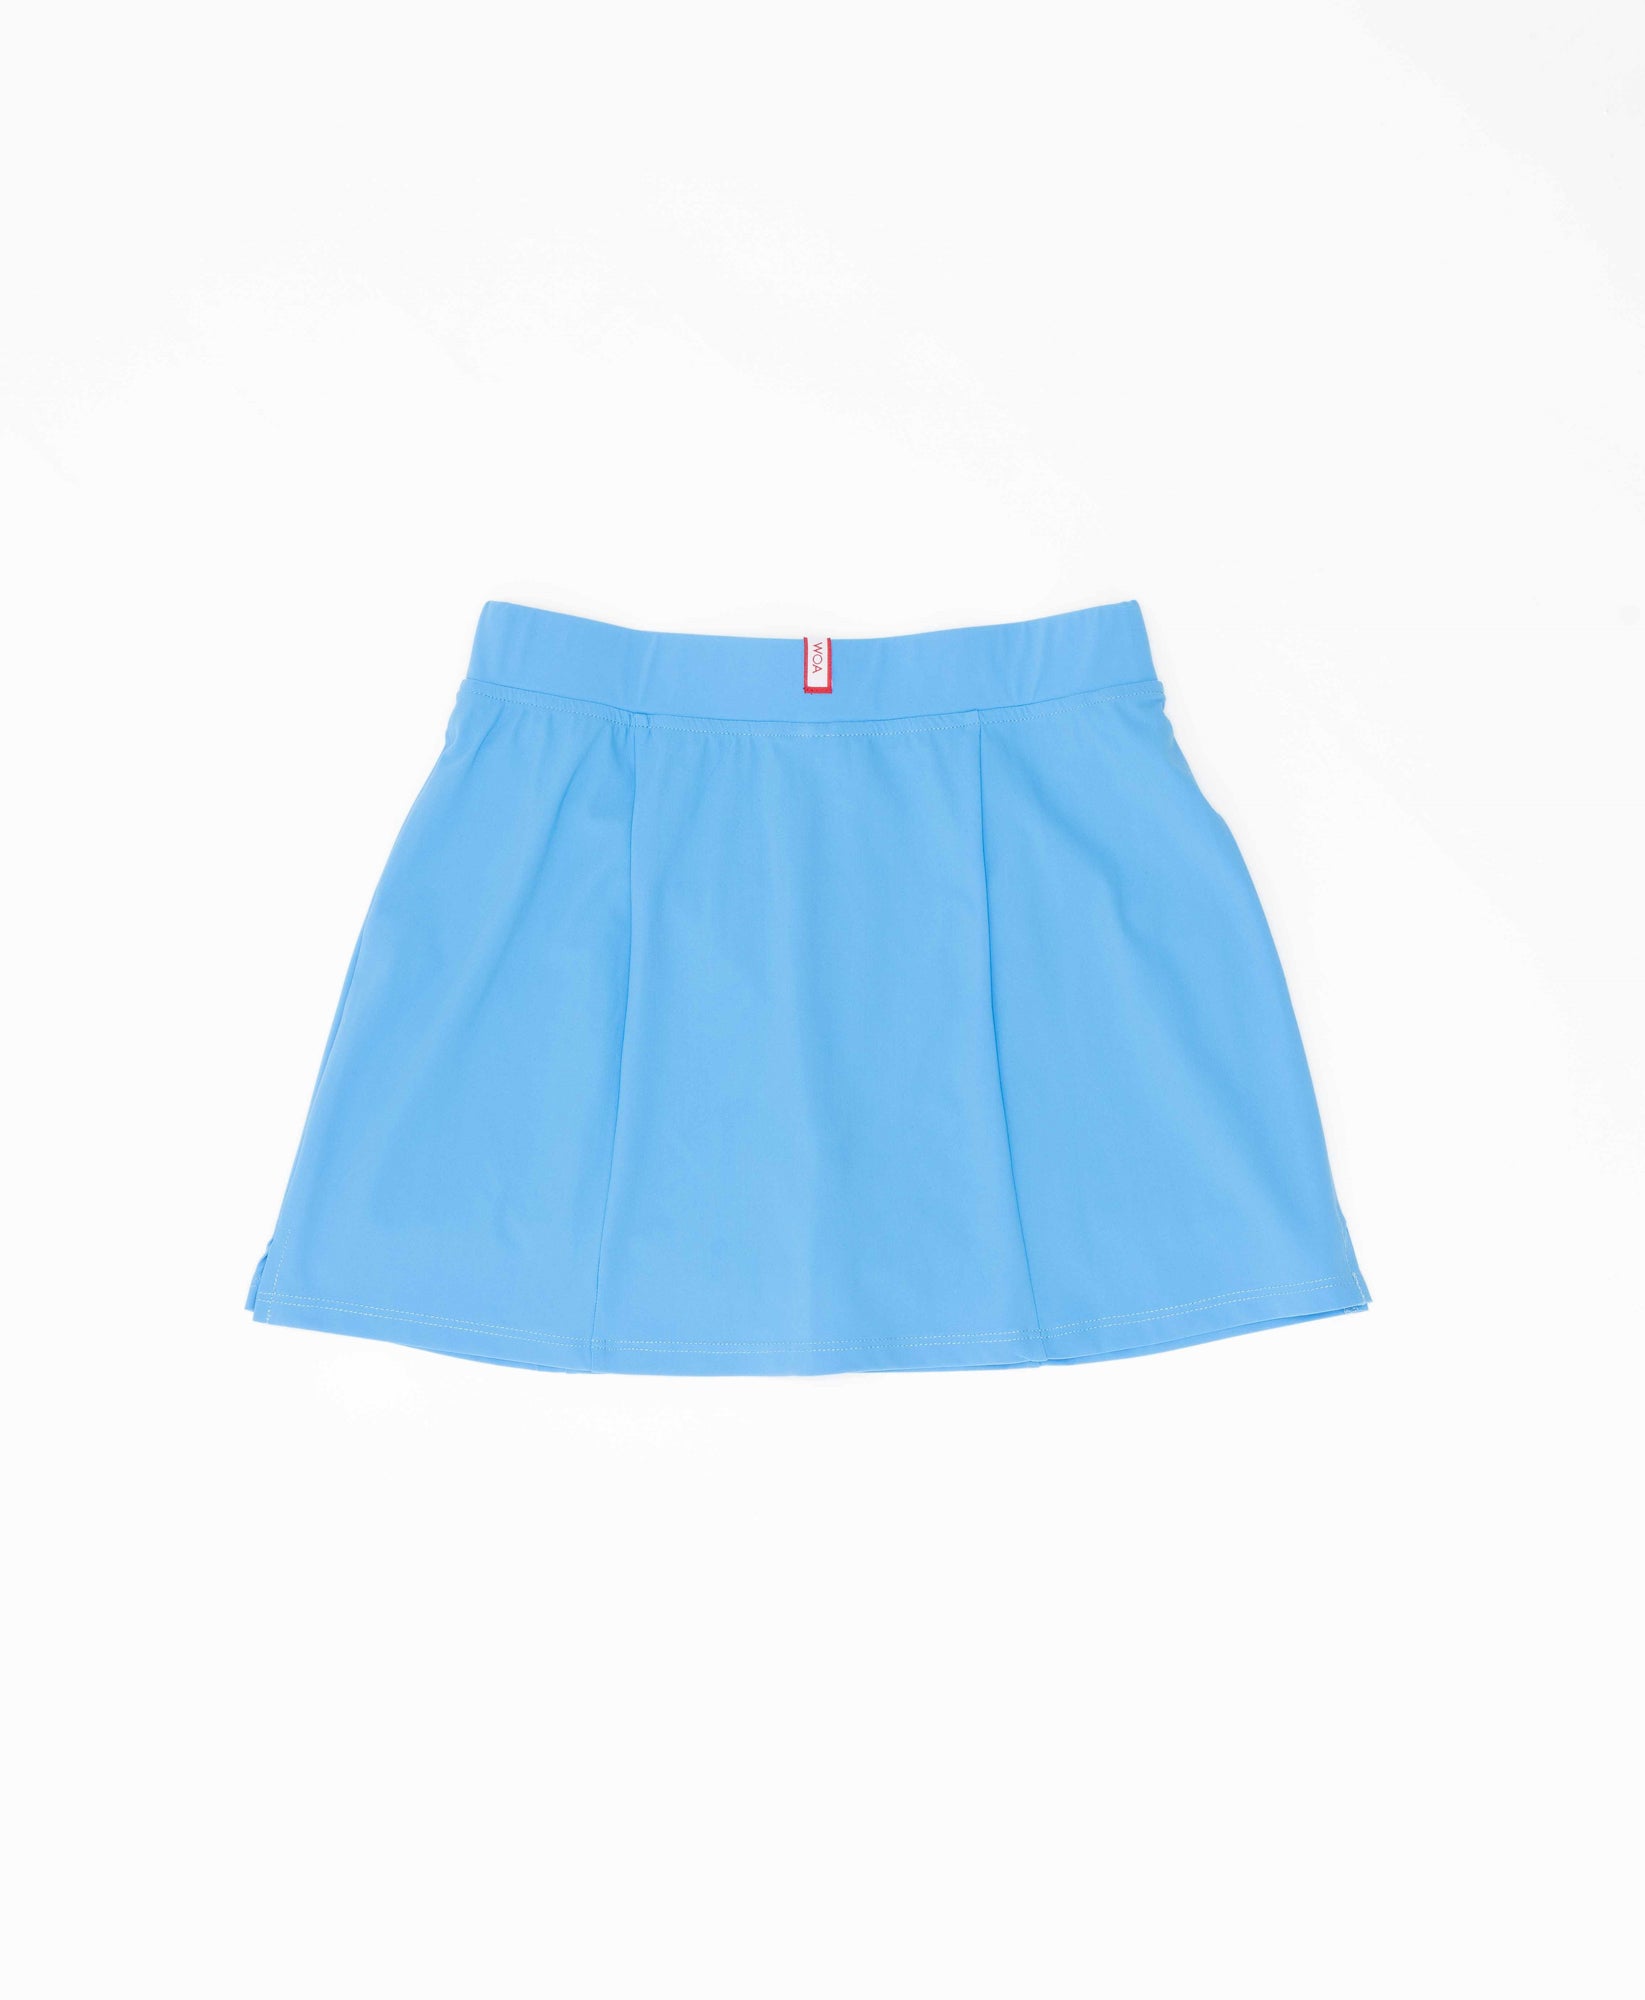 Wear One's At Simple Skort in Forget Me Not Blue Flat Front